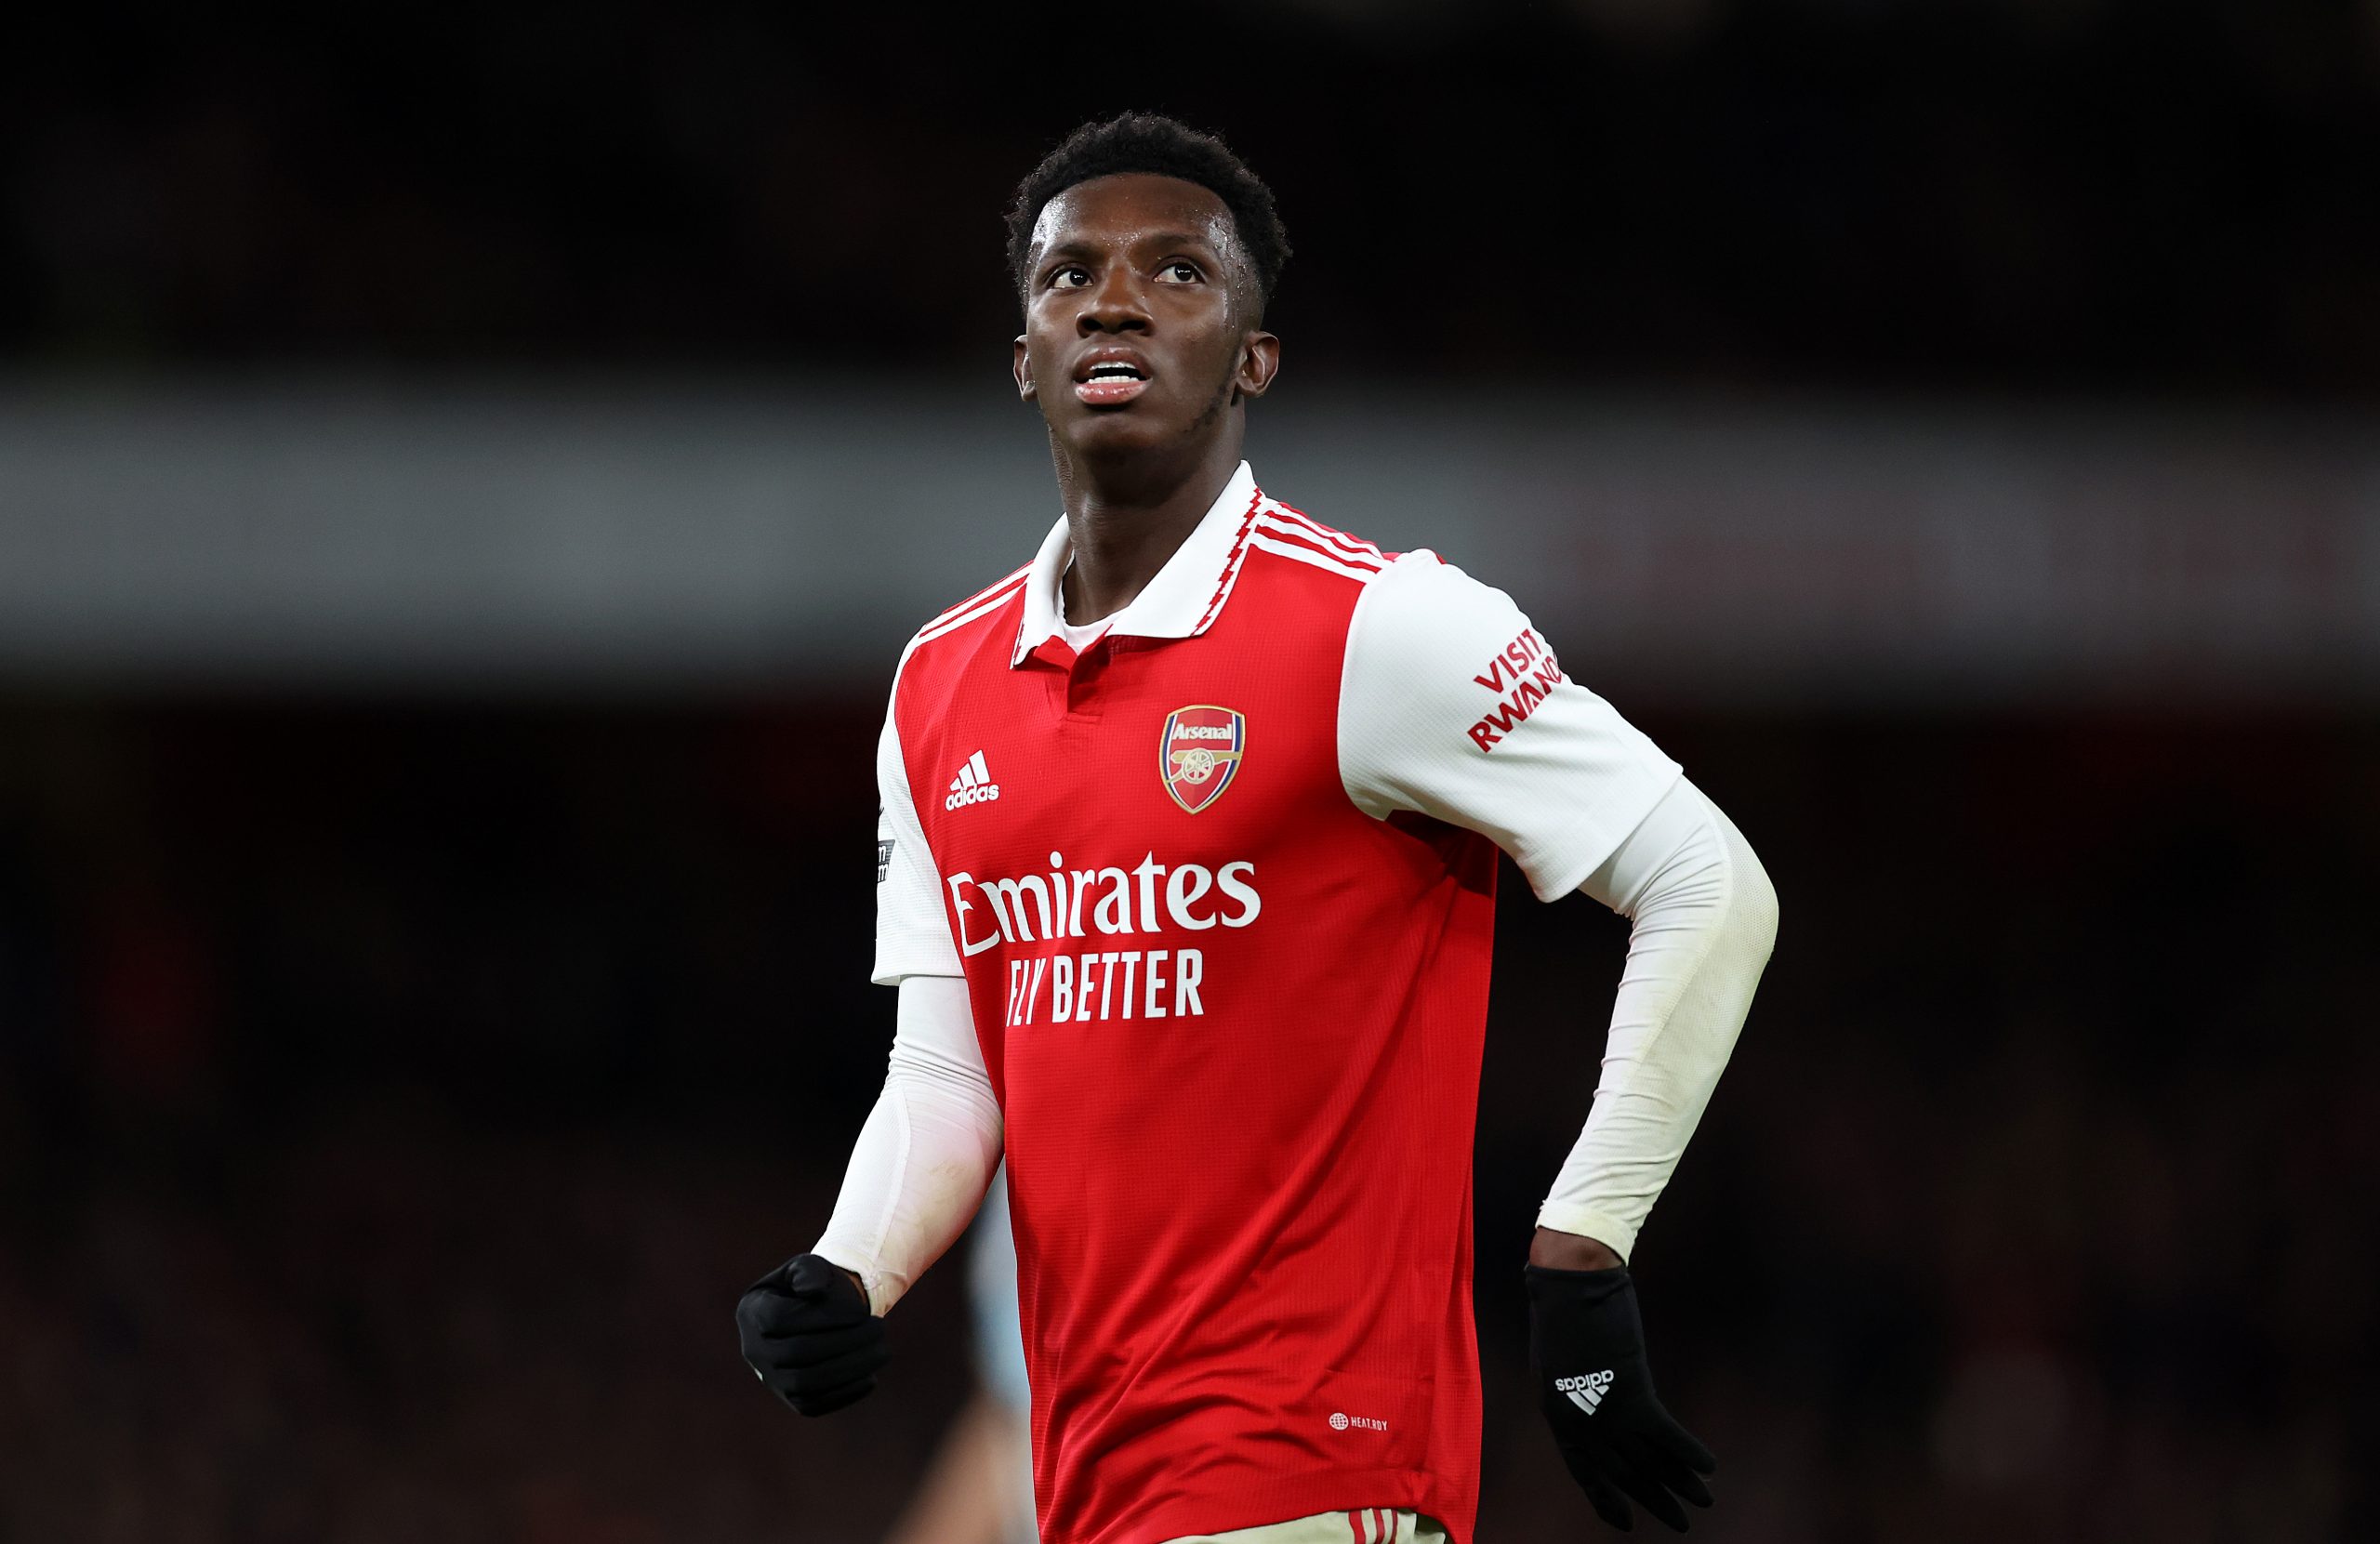 Eddie Nketiah of Arsenal looks on during the Premier League match between Arsenal FC and Newcastle United at Emirates Stadium on January 03, 2023 in London, England. (Photo by Julian Finney/Getty Images)